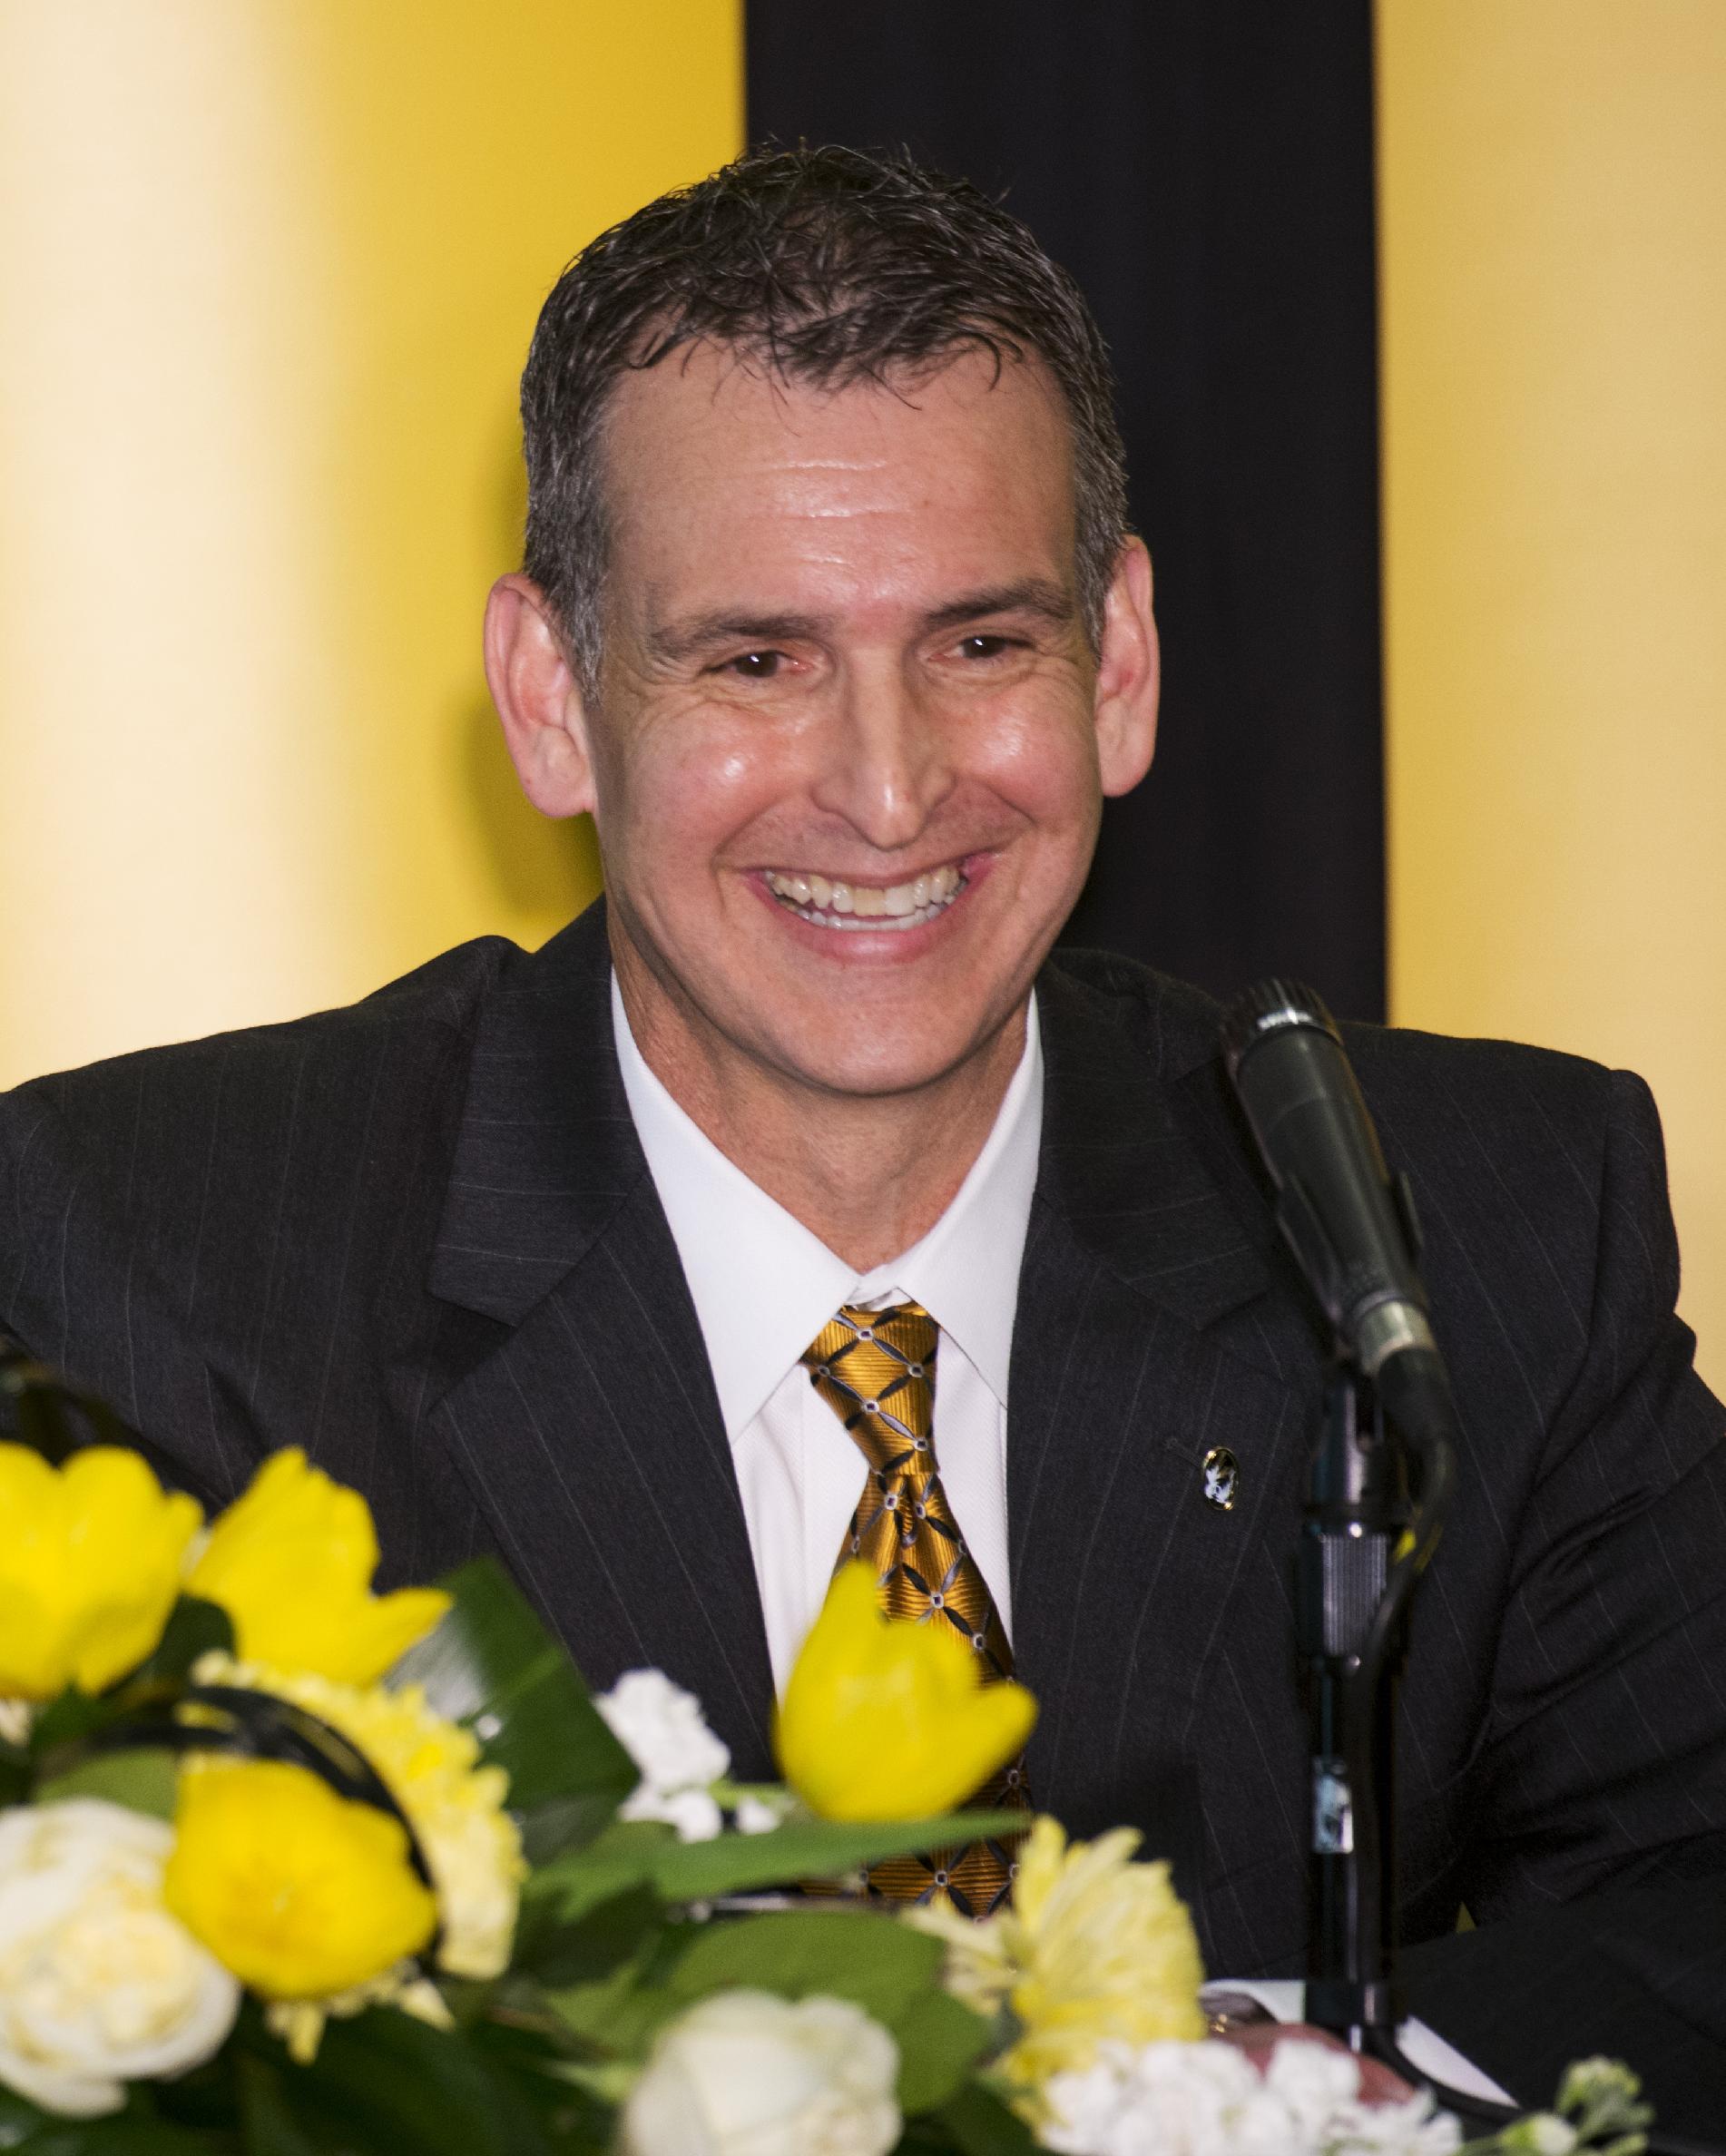 Missouri athletic director Mack Rhoades smiles during his introductory press conference Tuesday, March 10, 2015, on the University of Missouri campus in Columbia, Mo. (AP Photo/L.G. Patterson)